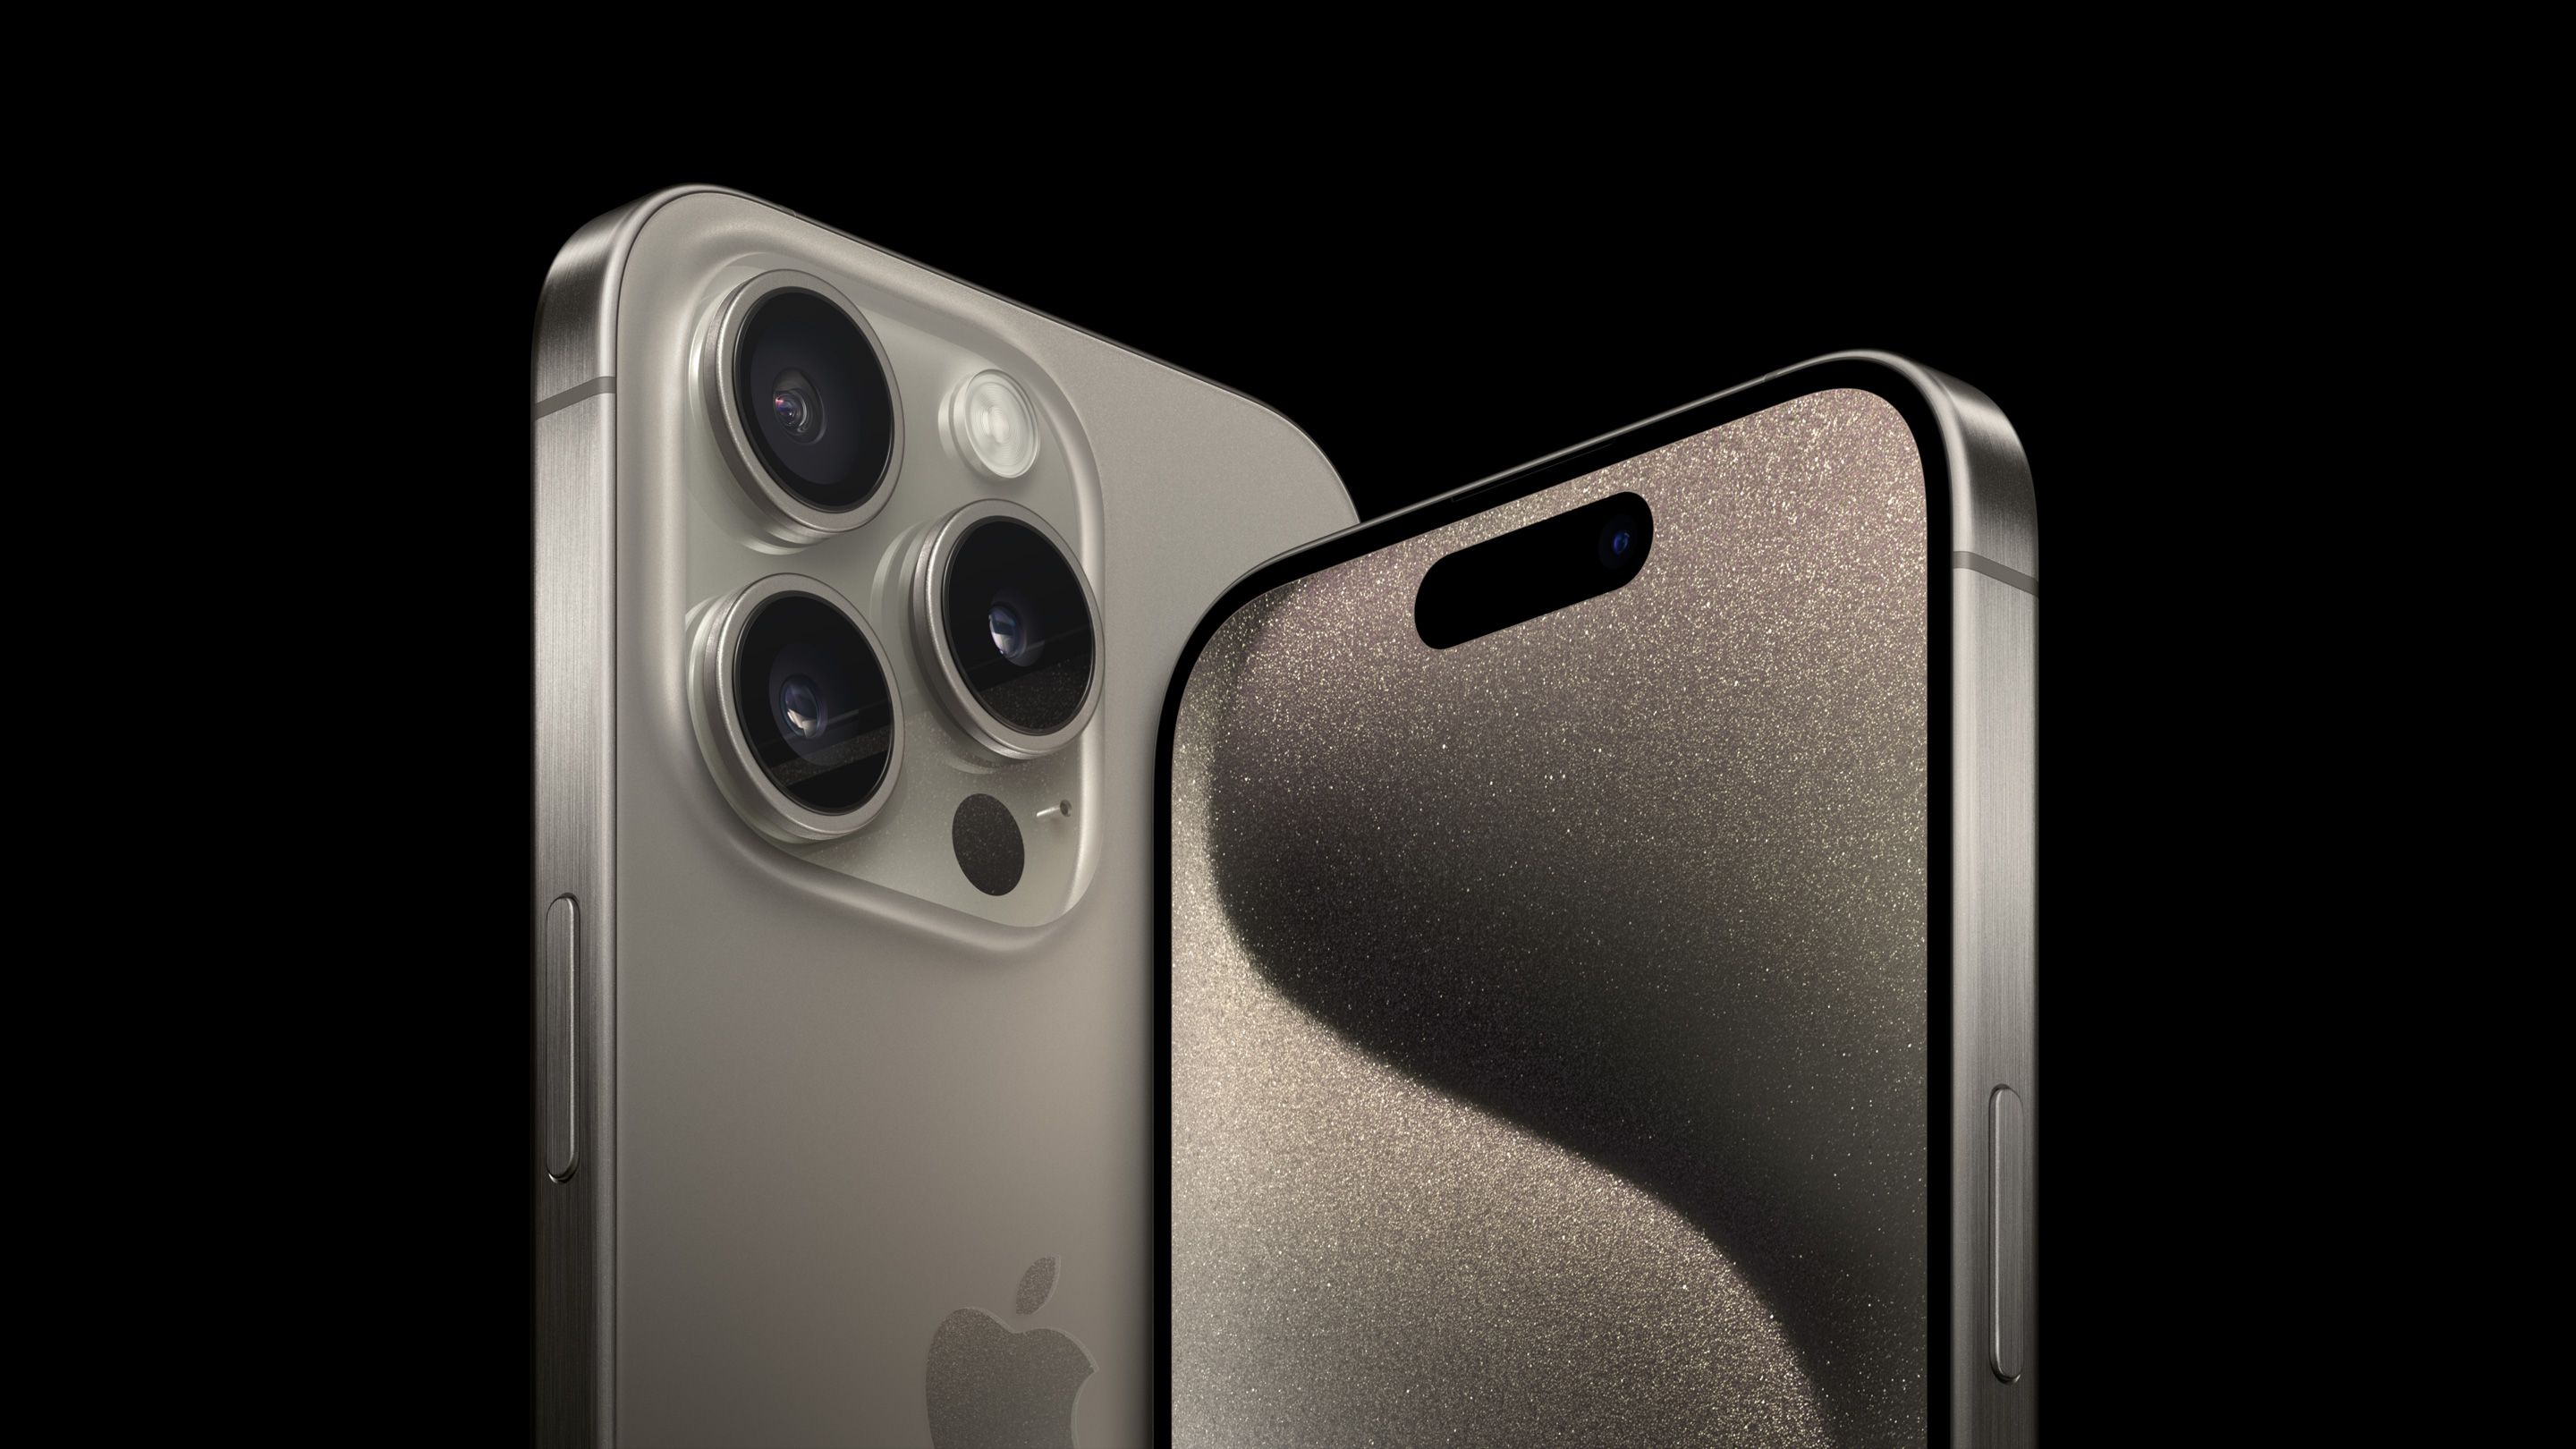 Apple says the 128GB iPhone 15 Pro is limited to 1080p ProRes video recording unless external storage is connected